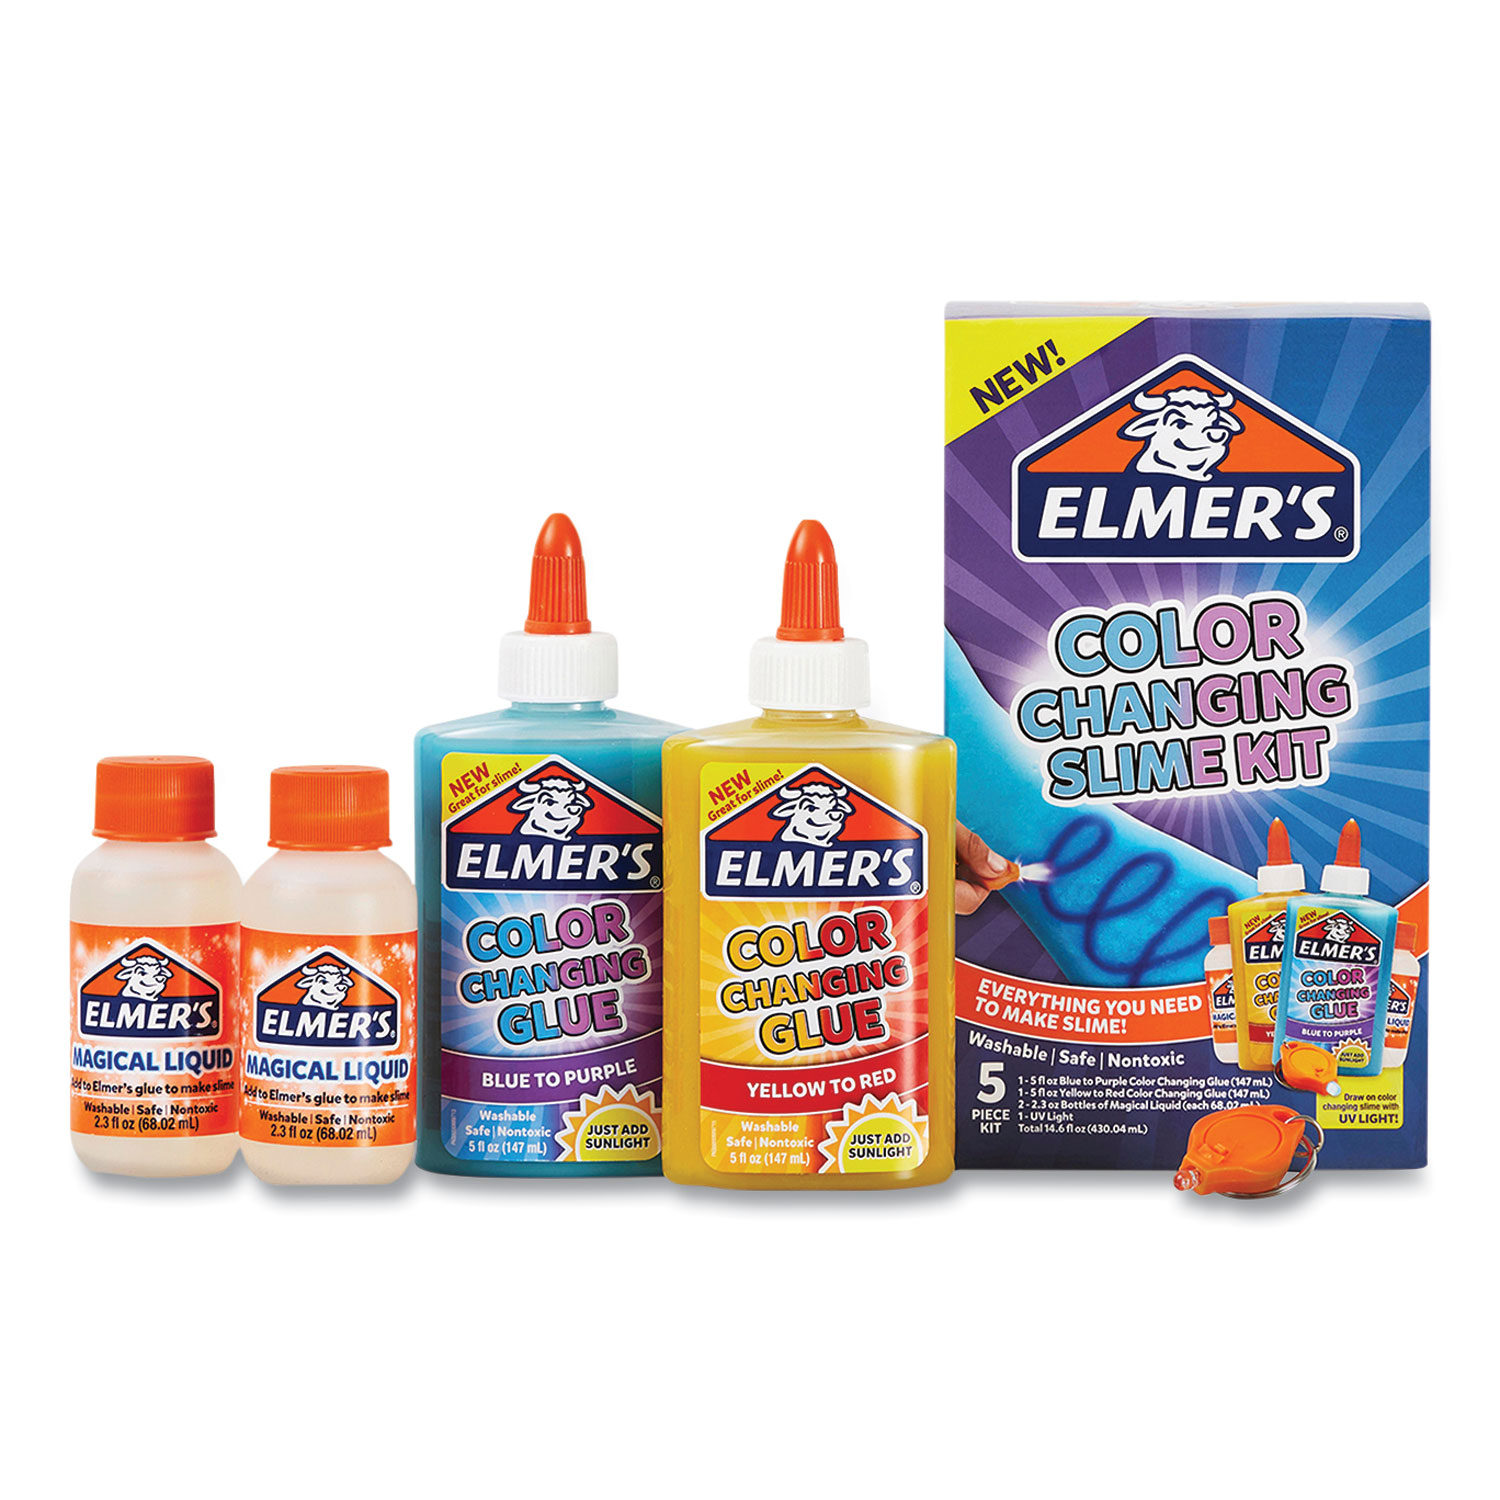 Elmers® Color Changing Slime Kit, (2) 5 oz Glues, Dries Purple and Red, (2) 2.3 oz Slime Activators, (1) UV Light